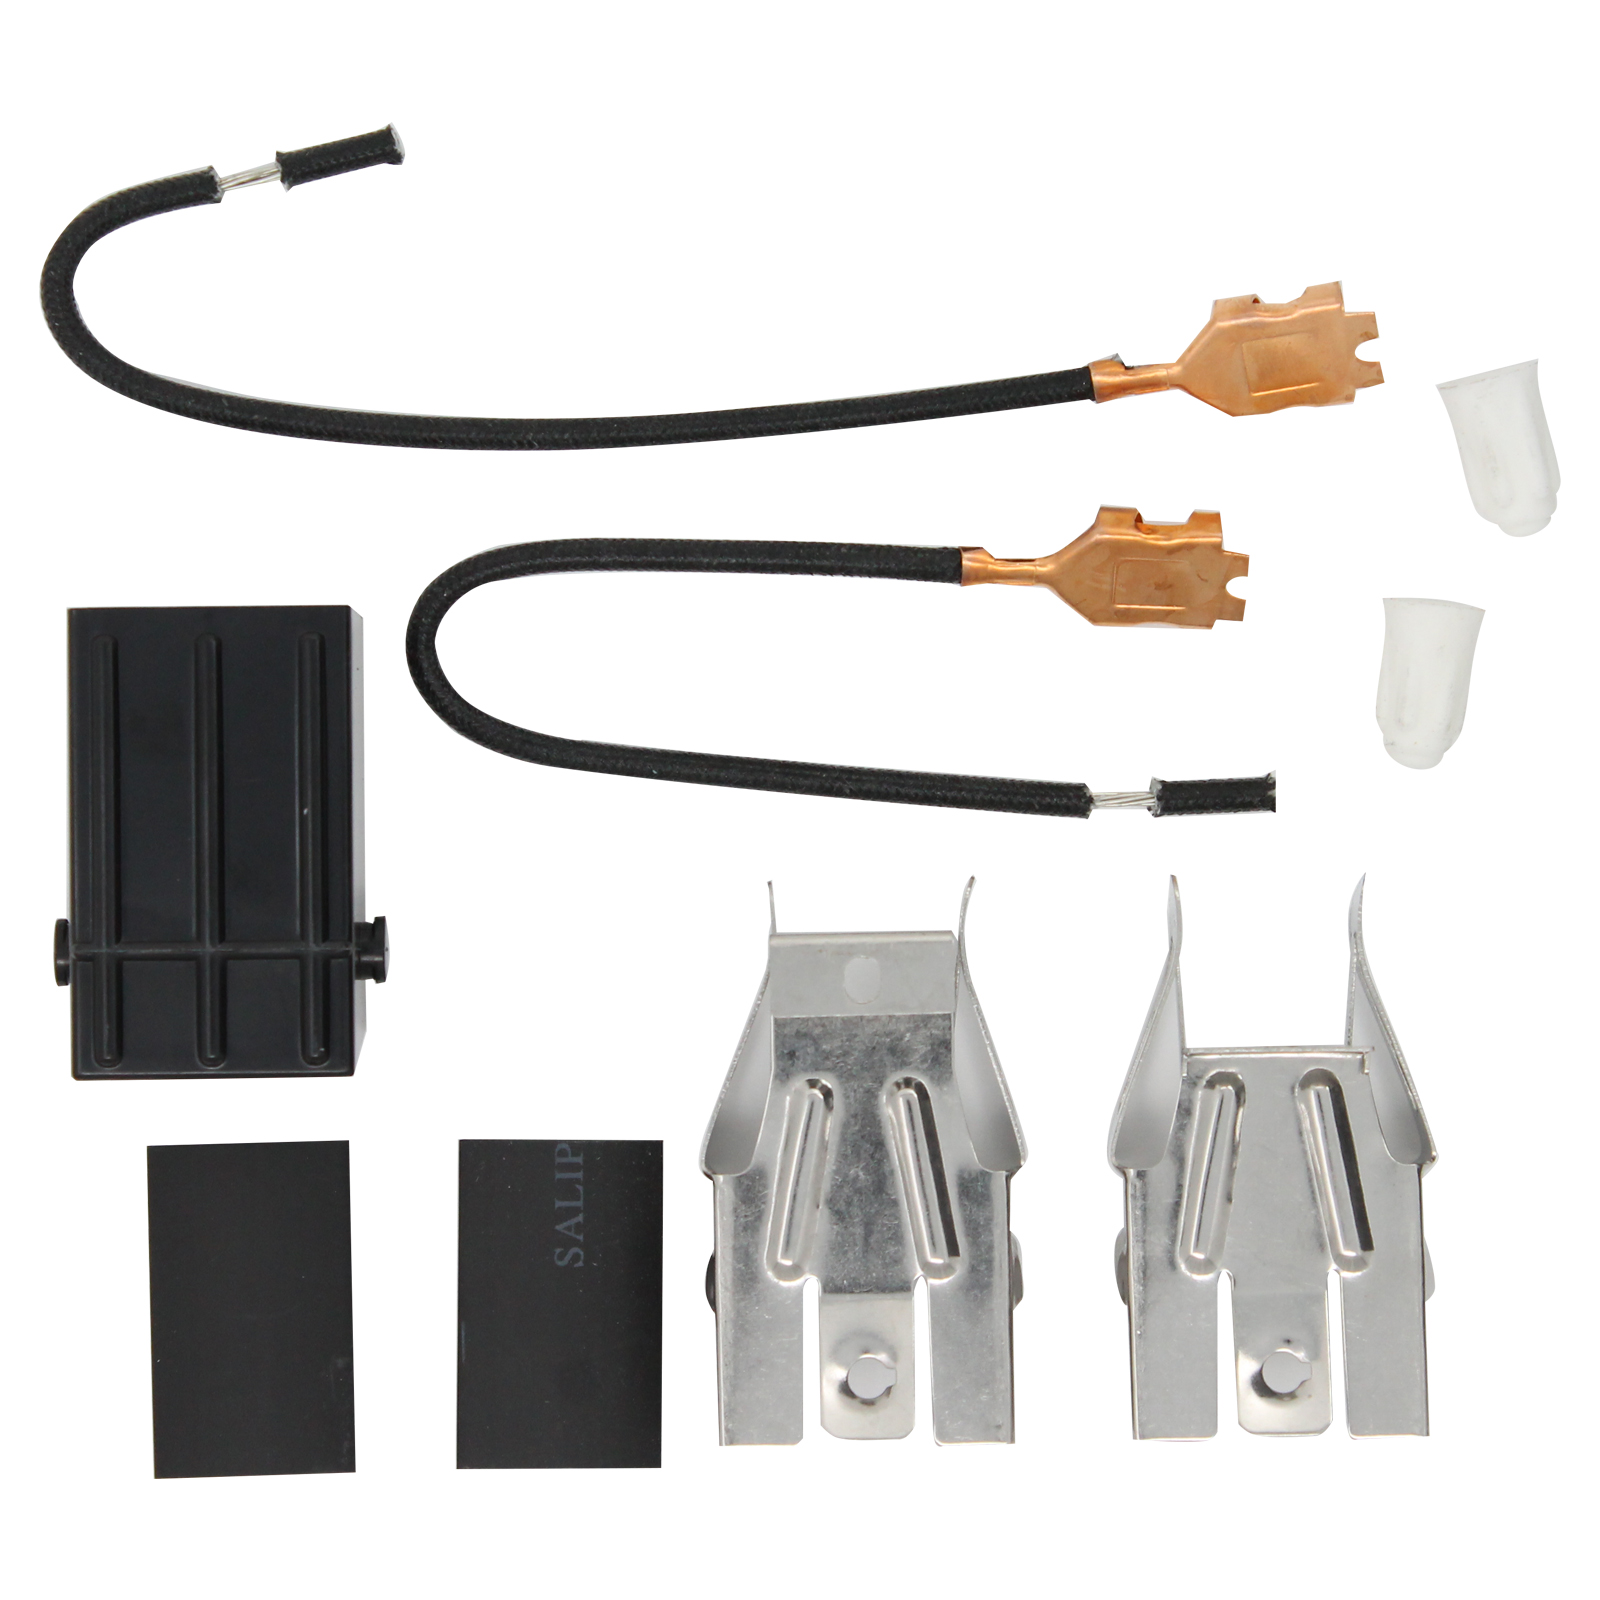 330031 Top Burner Receptacle Kit Replacement for Whirlpool RE960PXVN5 Range/Cooktop/Oven - Compatible with 330031 Range Burner Receptacle Kit - UpStart Components Brand - image 2 of 4